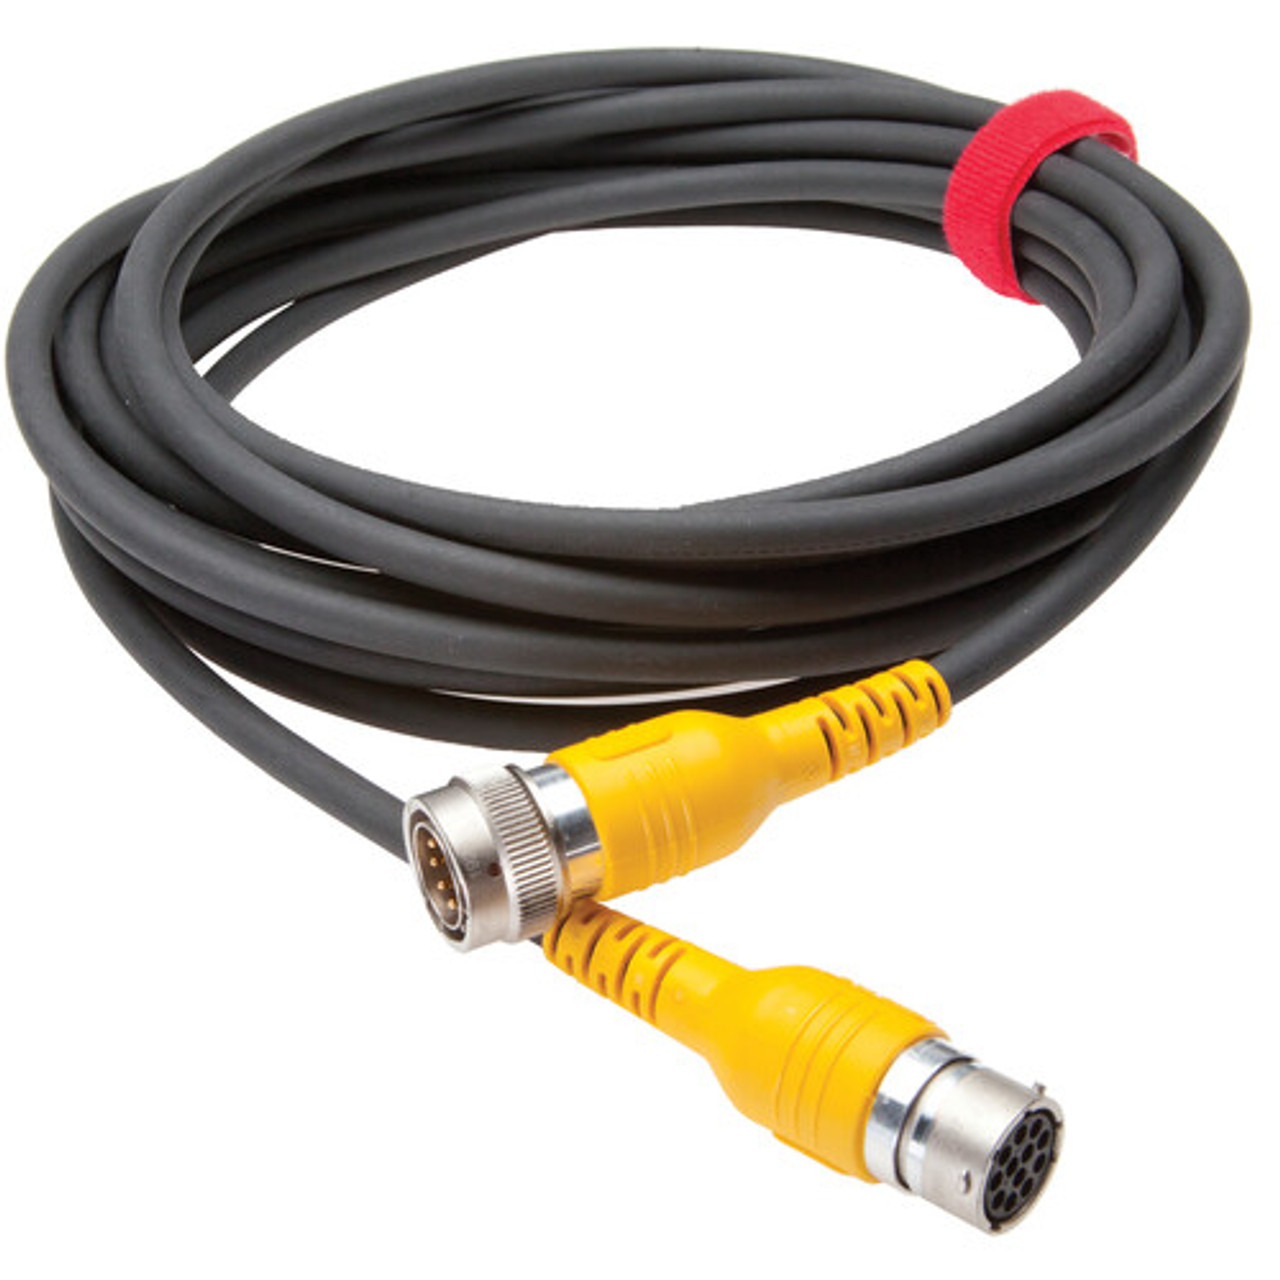 Kino Flo FreeStyle/4 Extension Cable (25') (X12-F425)